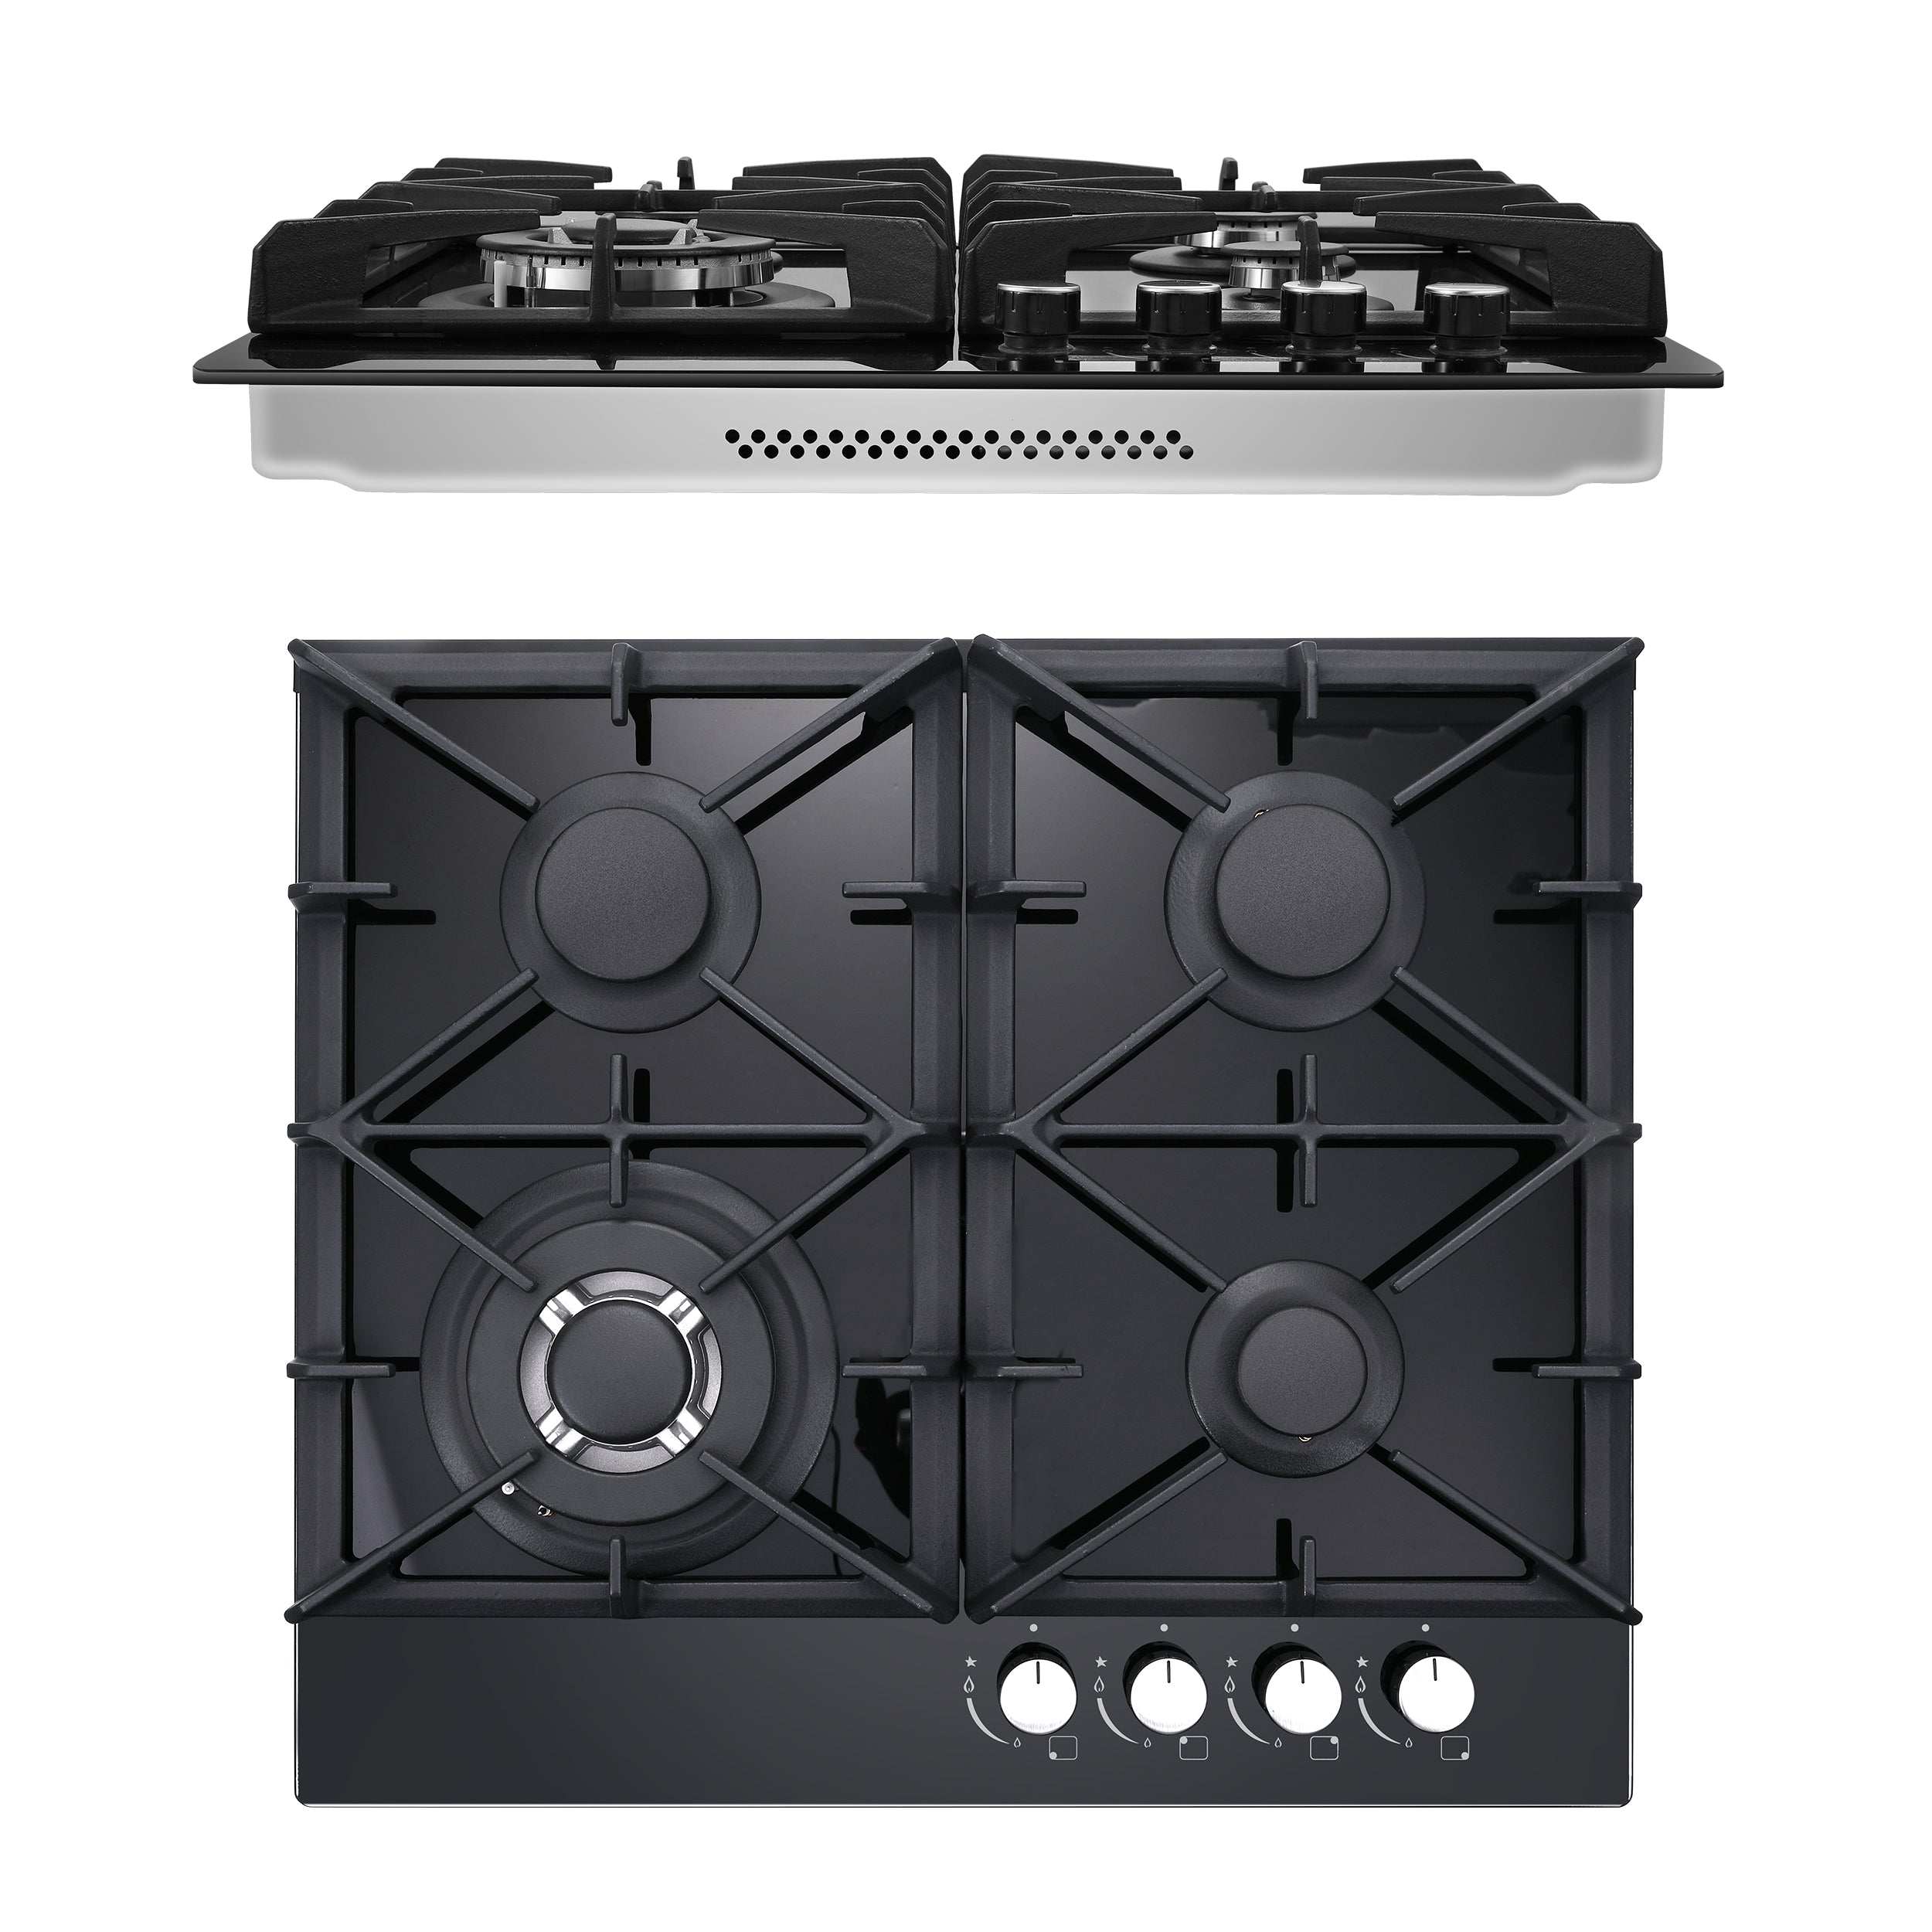 GC003-244G - 24 inch - 4 Burner Glass Gas Stove Top